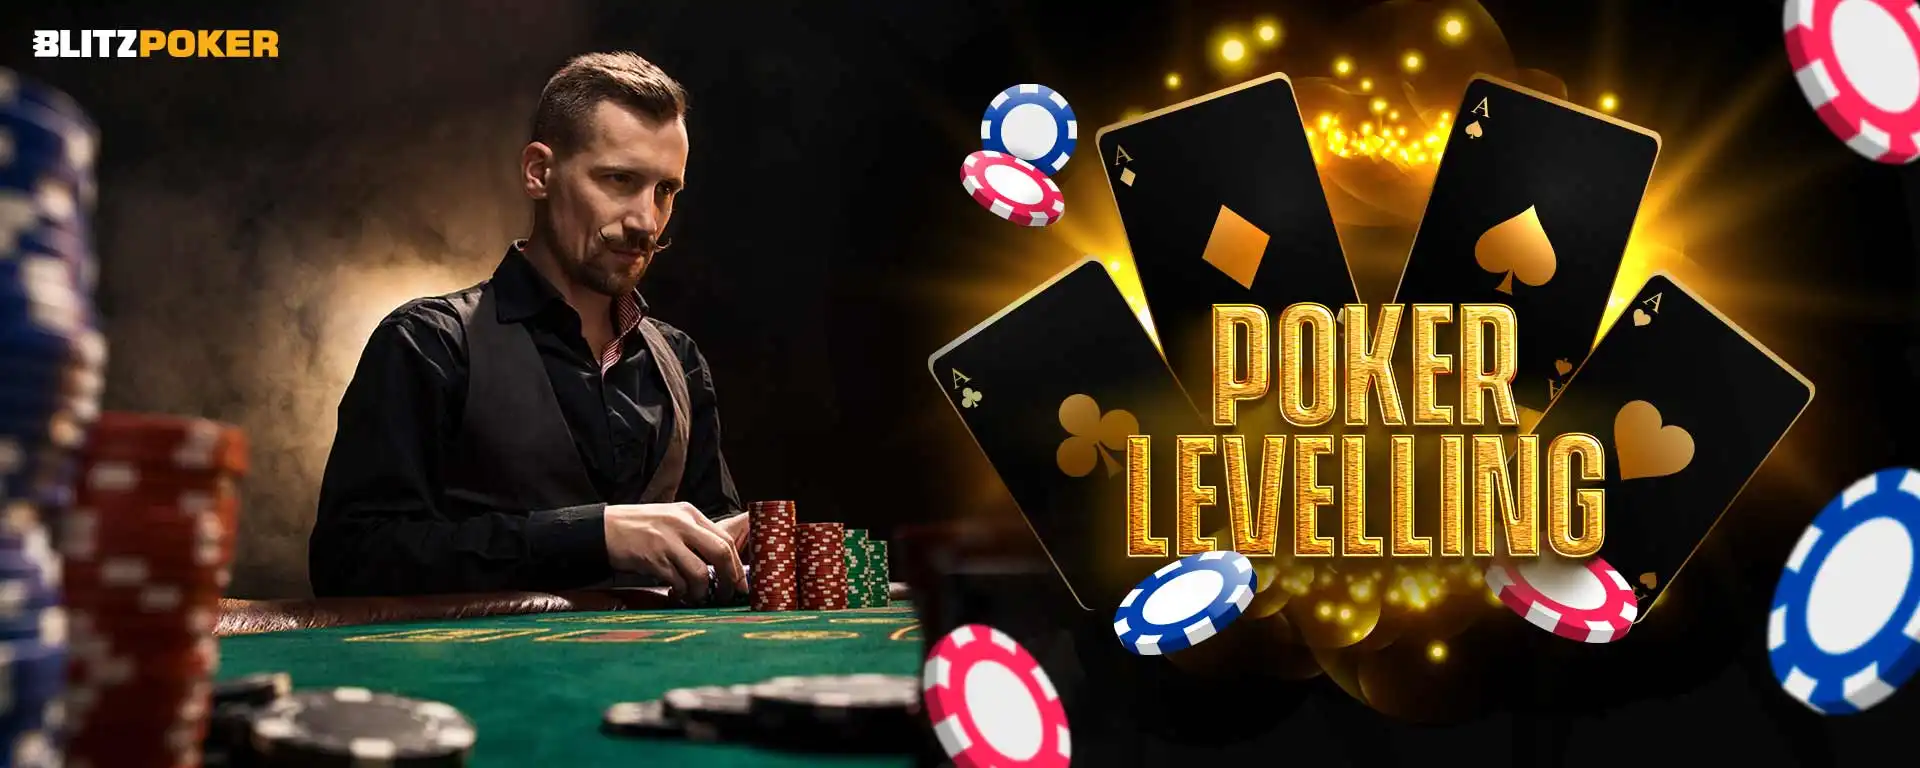 Poker Levelling: Meaning, Levels, Benefits & More